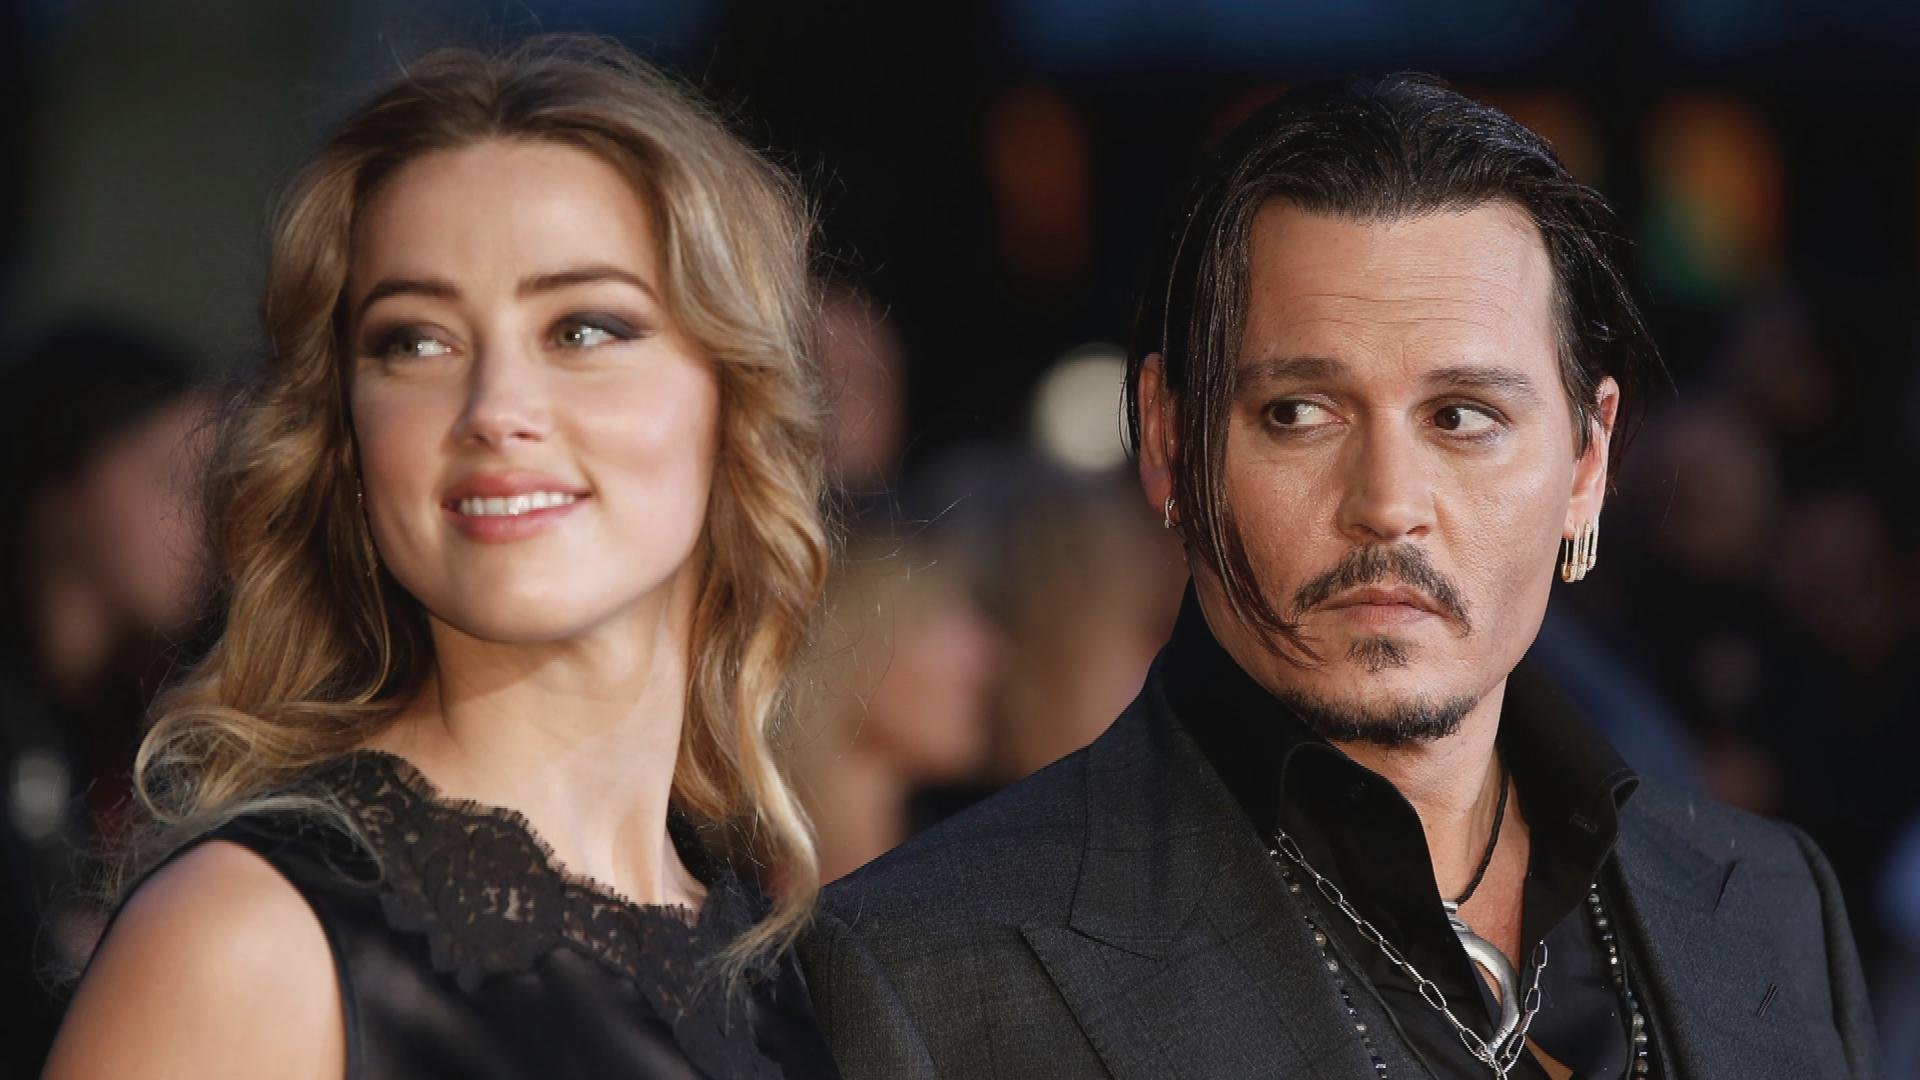 entertainment tonight.jpg?resize=1200,630 - Johnny Depp Accused His Ex-Wife Amber Heard Of Putting Out A Cigarette On His Face